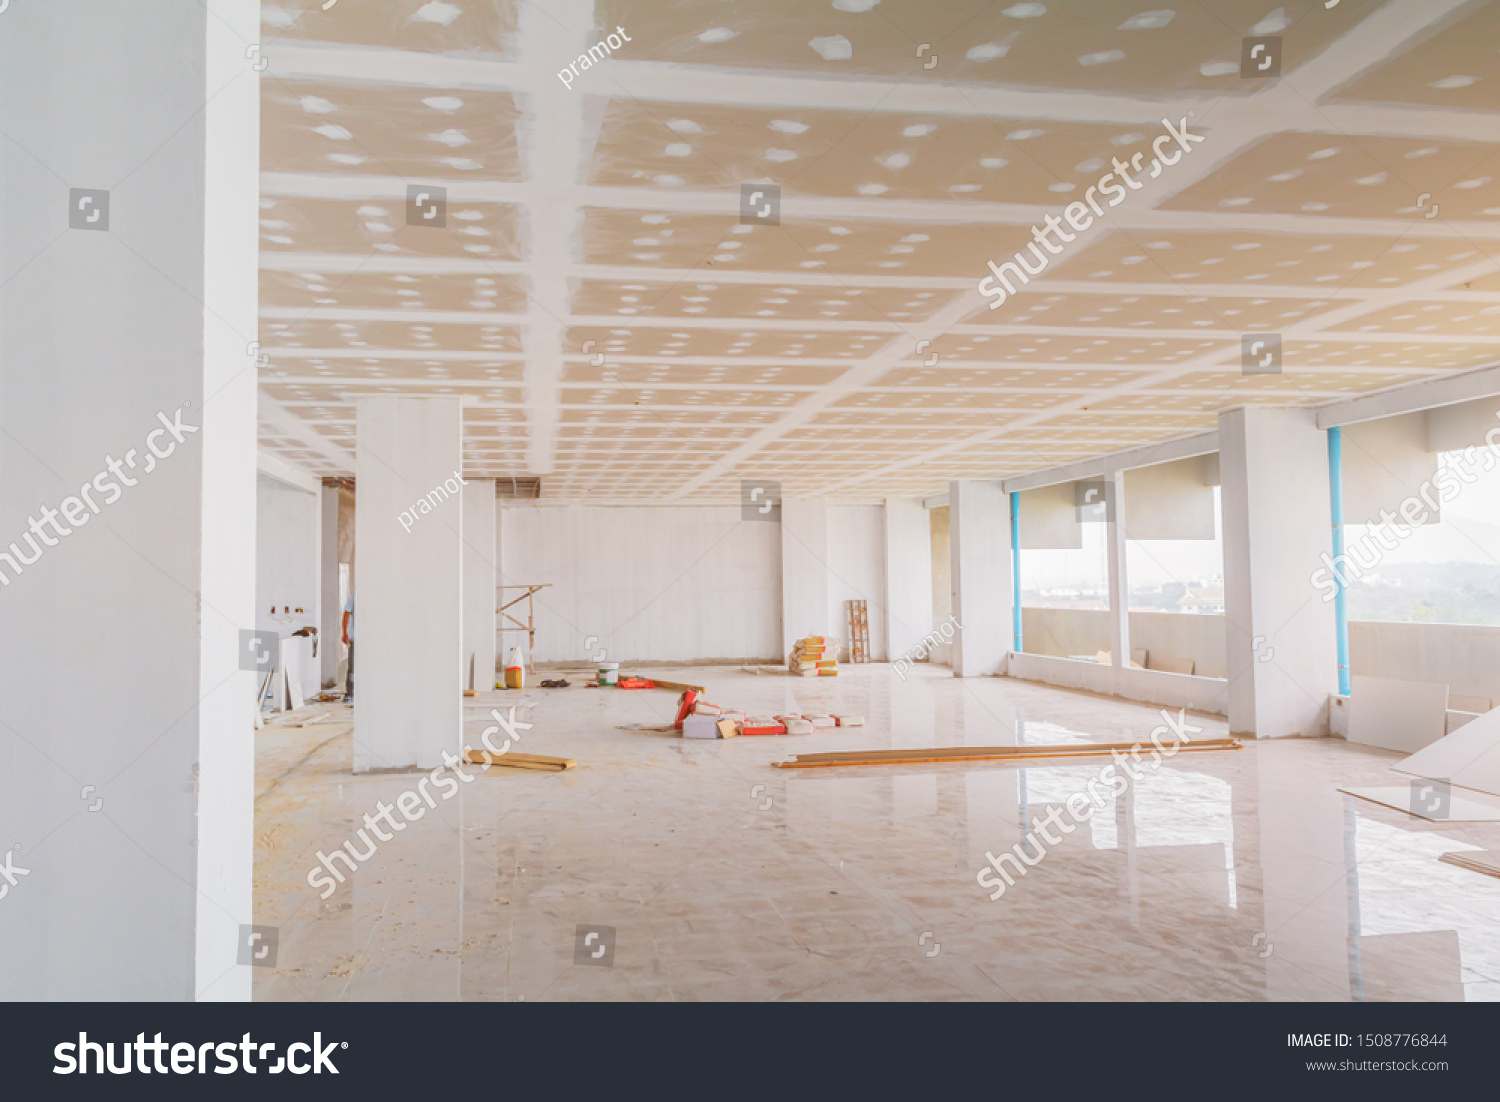 Gypsum Board Ceiling Structure Plaster Mortar Stock Photo